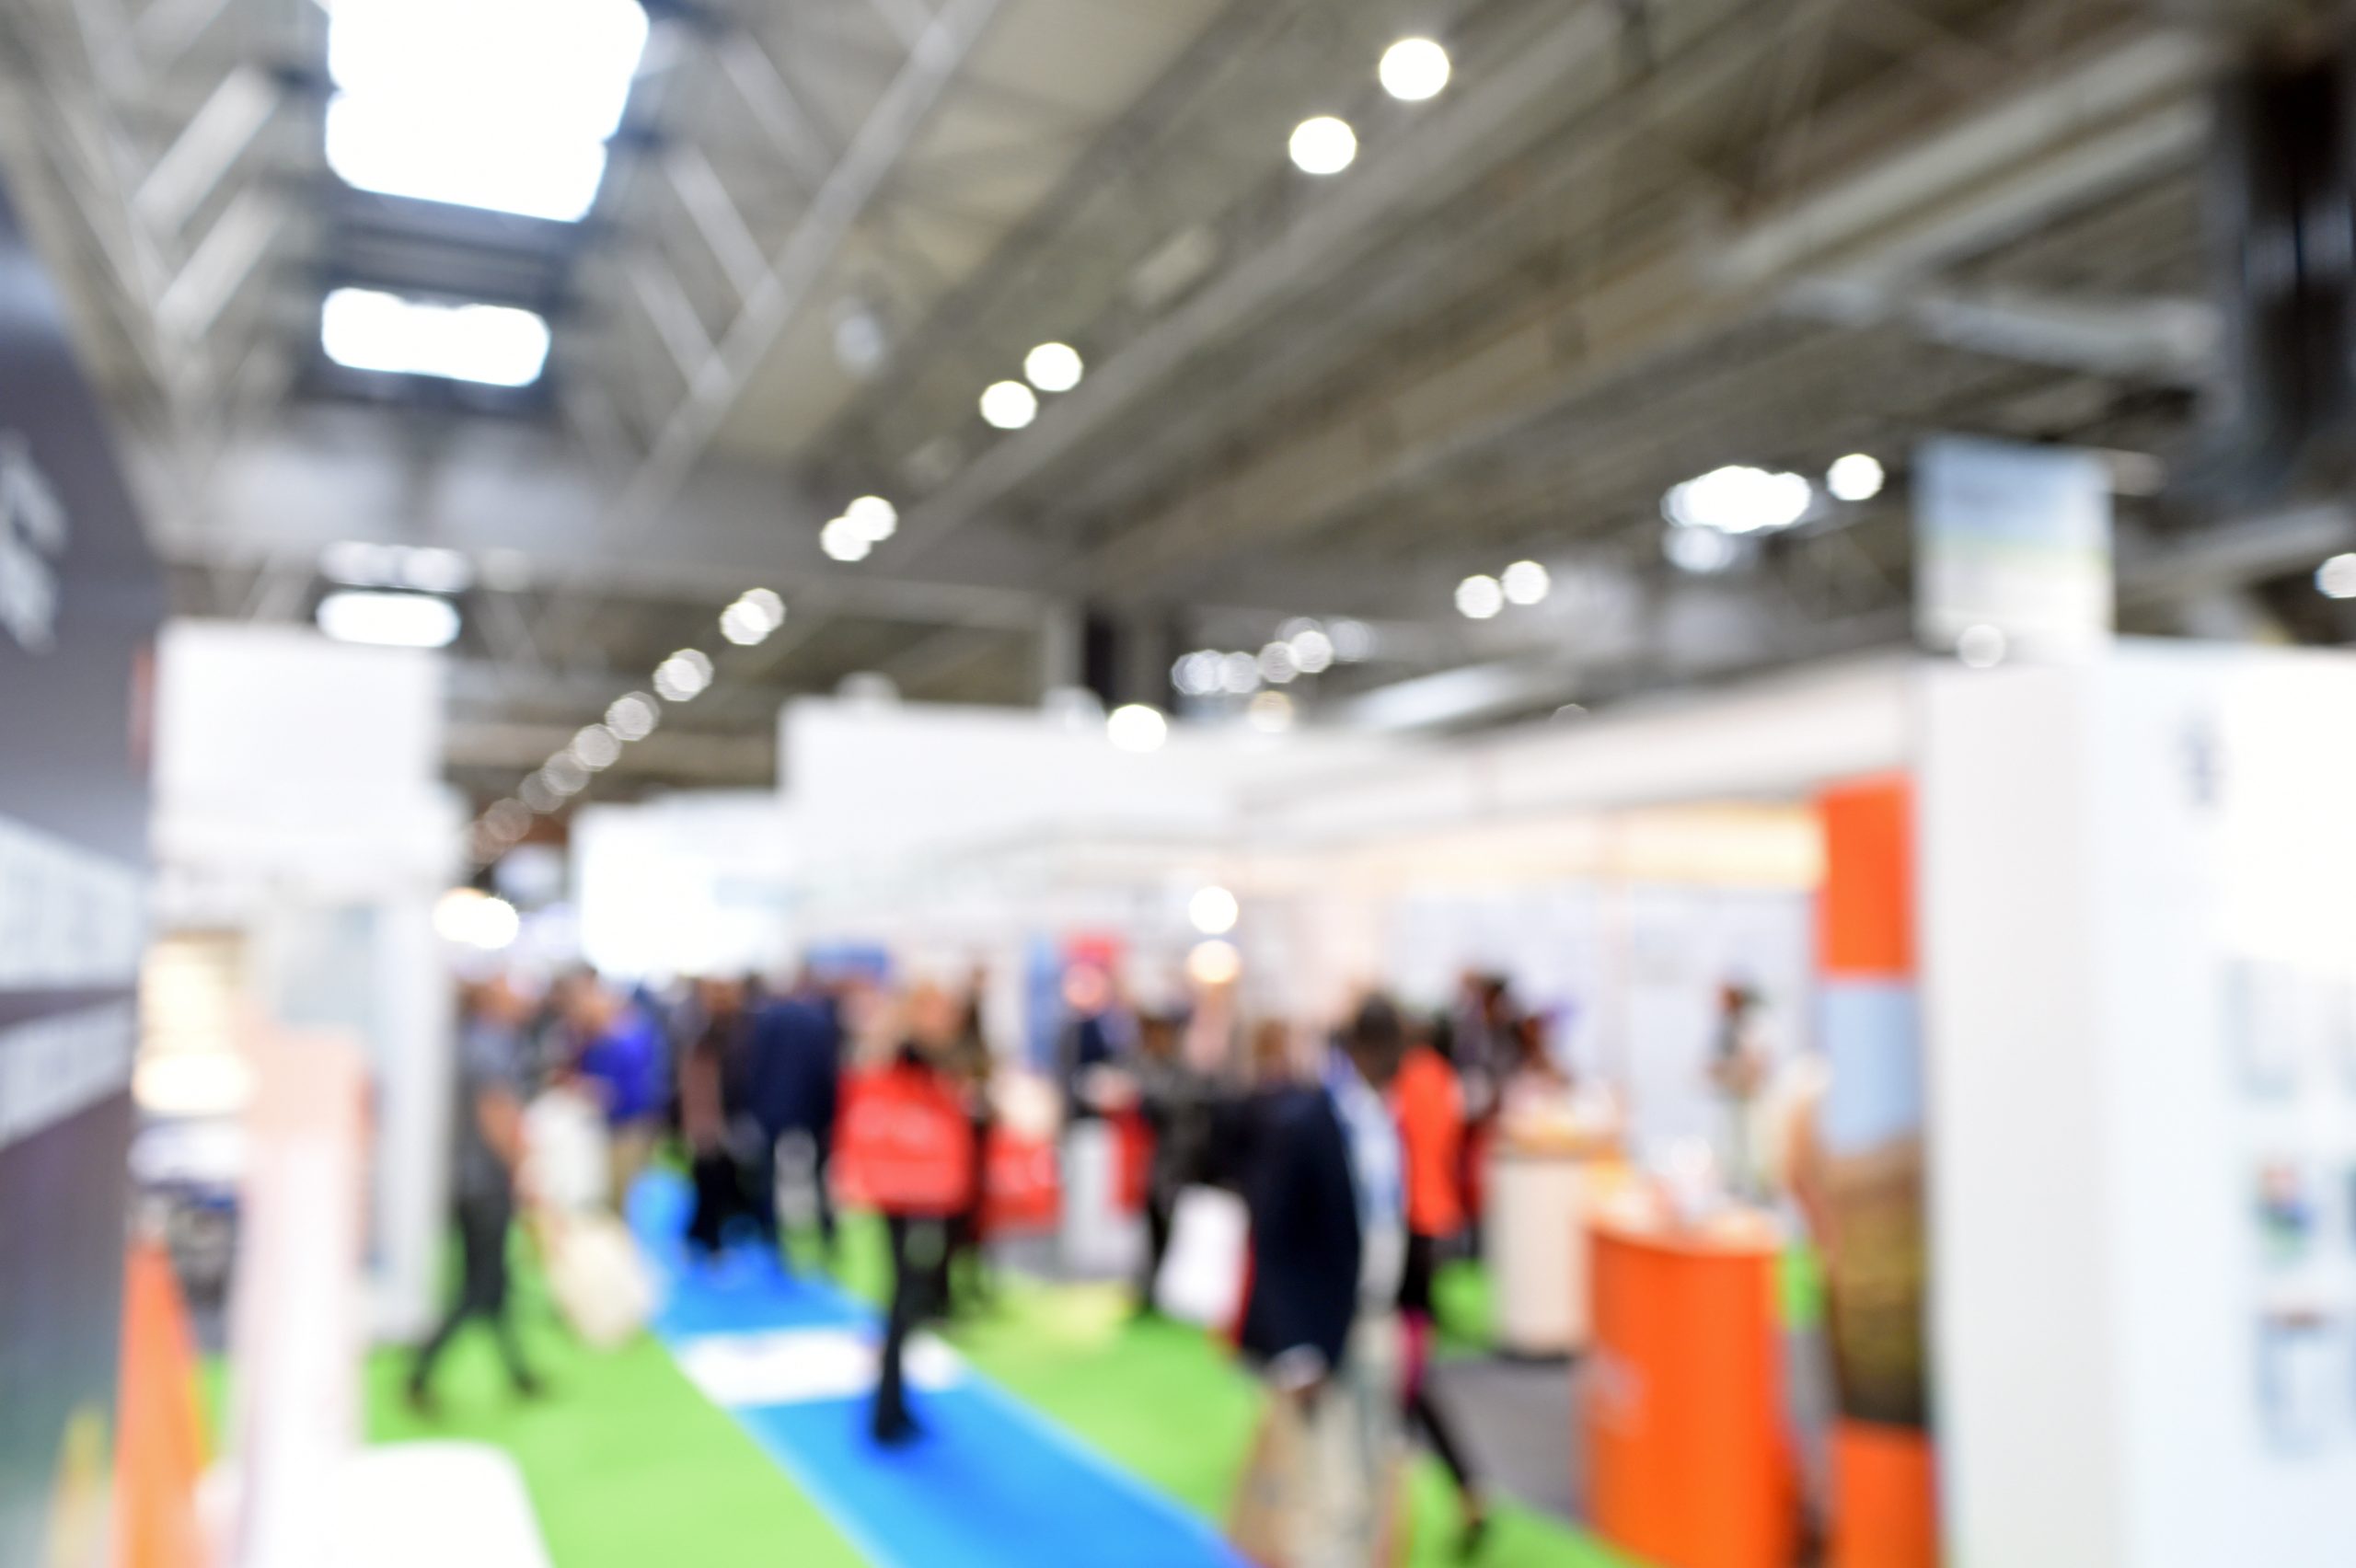 Your guide to the international trade show ATA Carnet